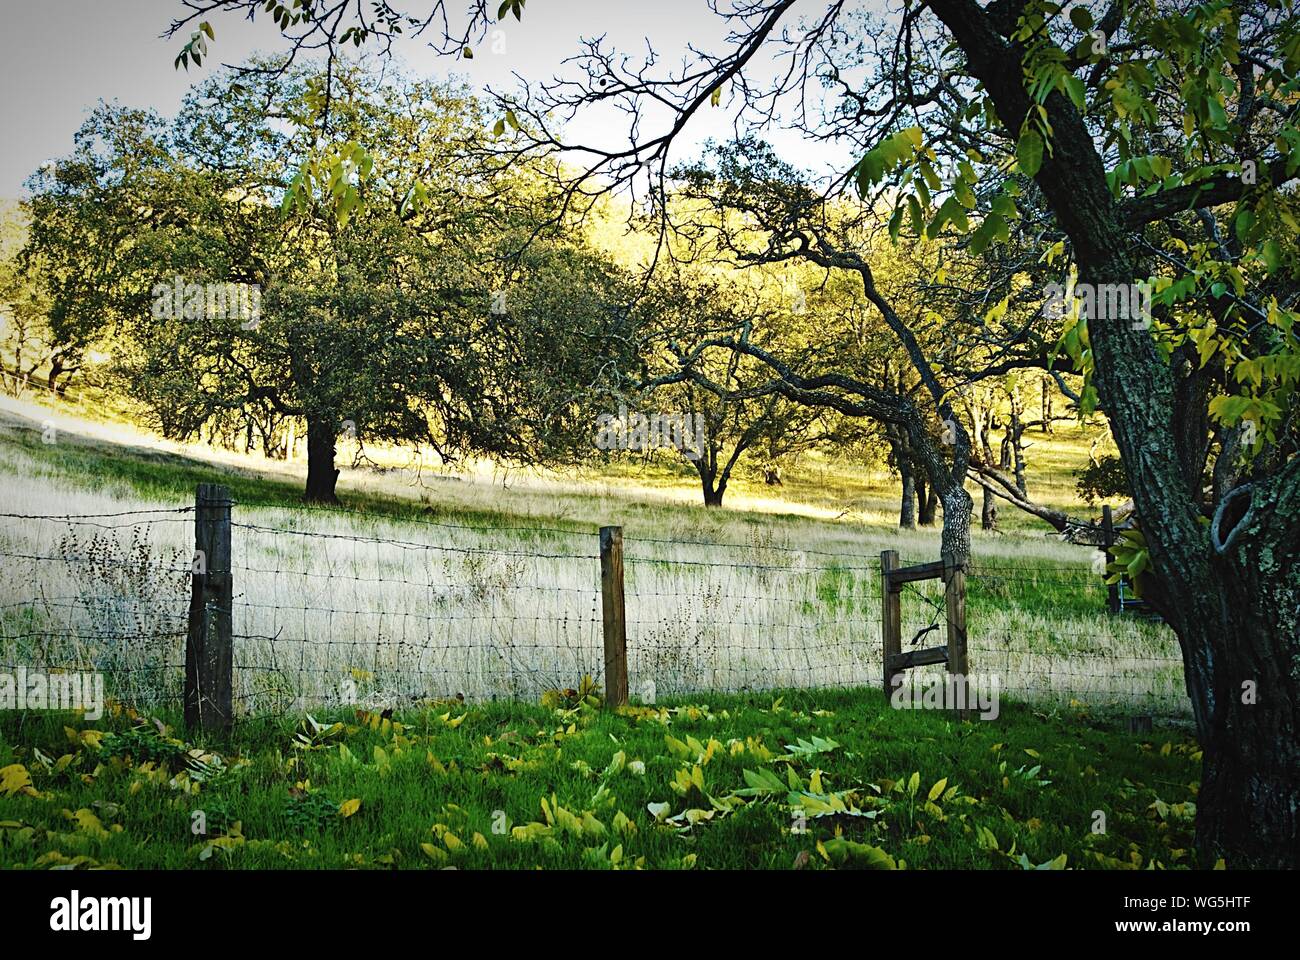 Oak Trees By Fence On Grassy Field At Old Borges Ranch Stock Photo